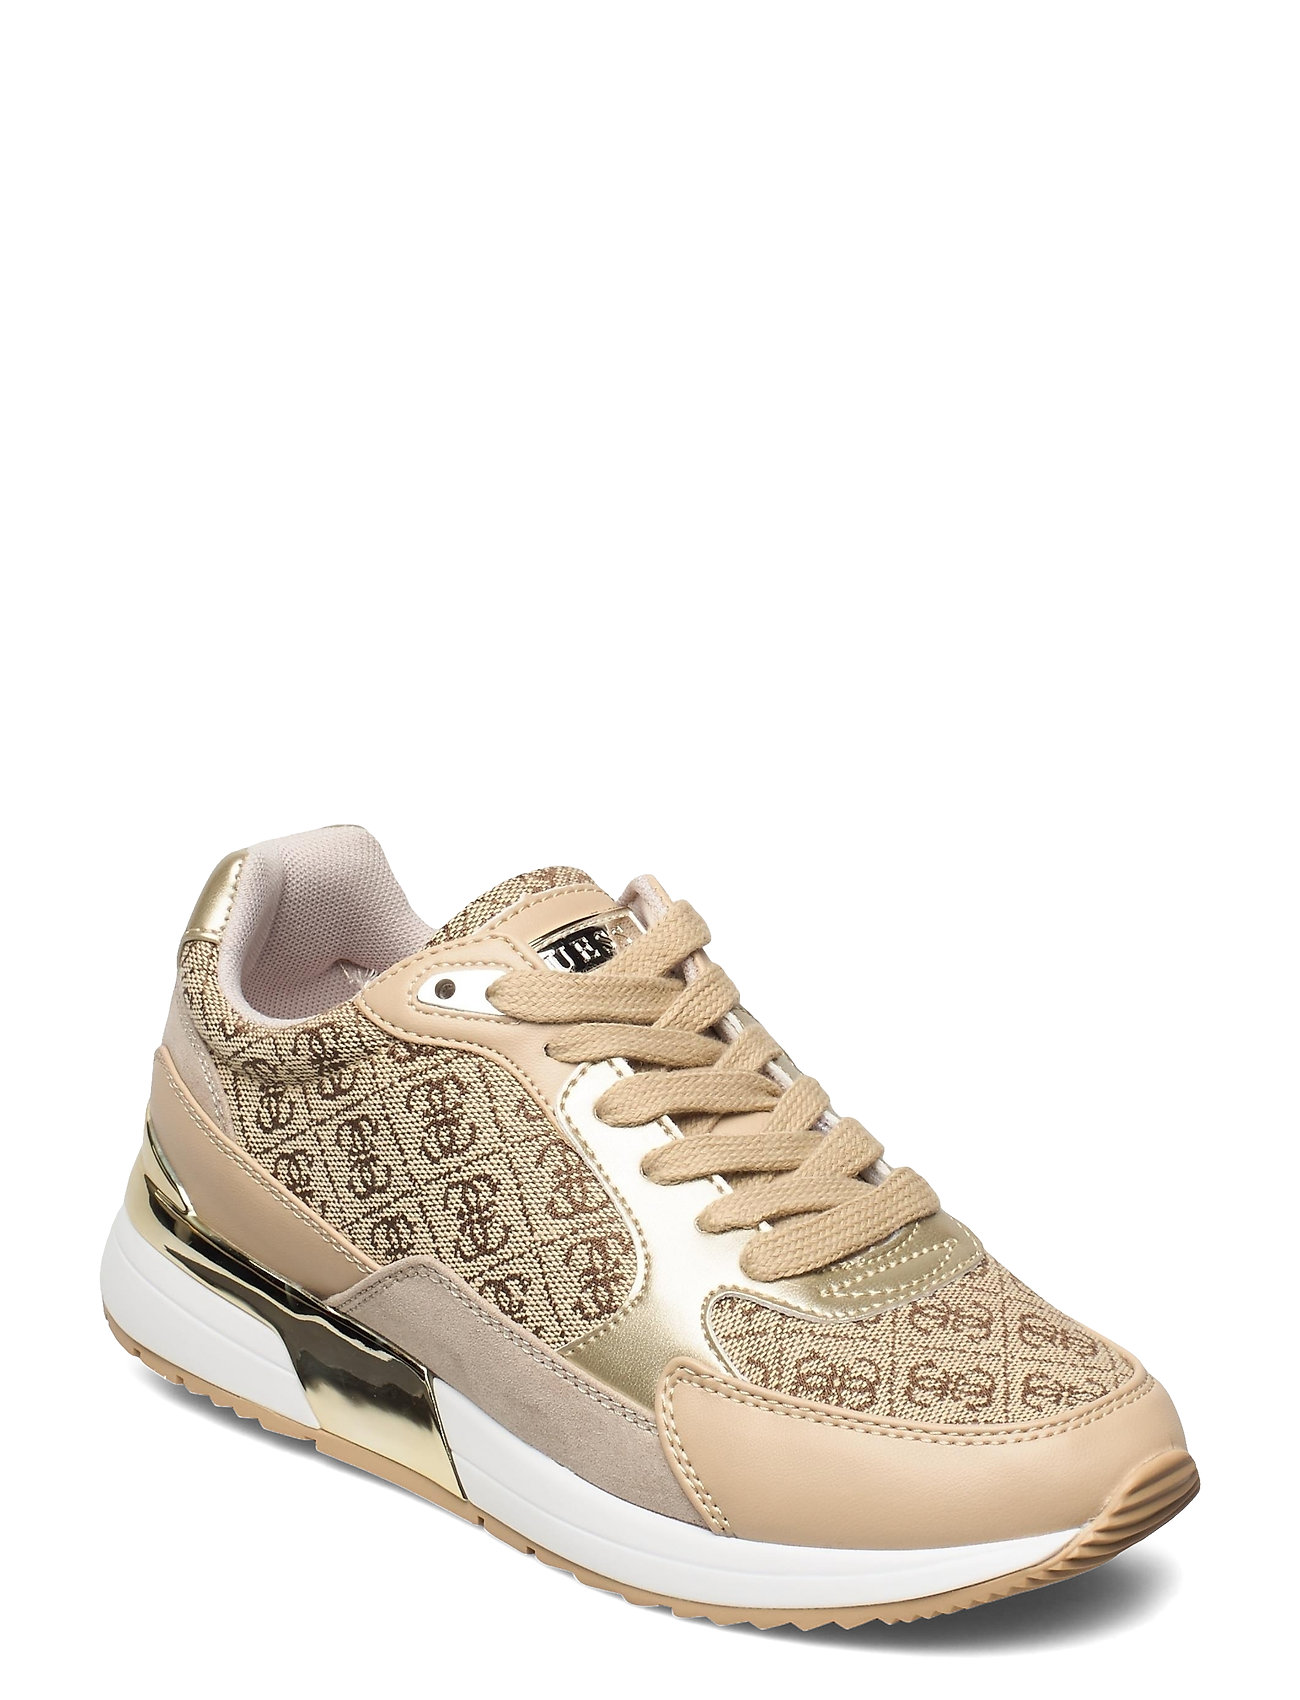 Moxea4/Active Lady/Fabric Low-top Guld GUESS sneakers fra GUESS til dame i - Pashion.dk